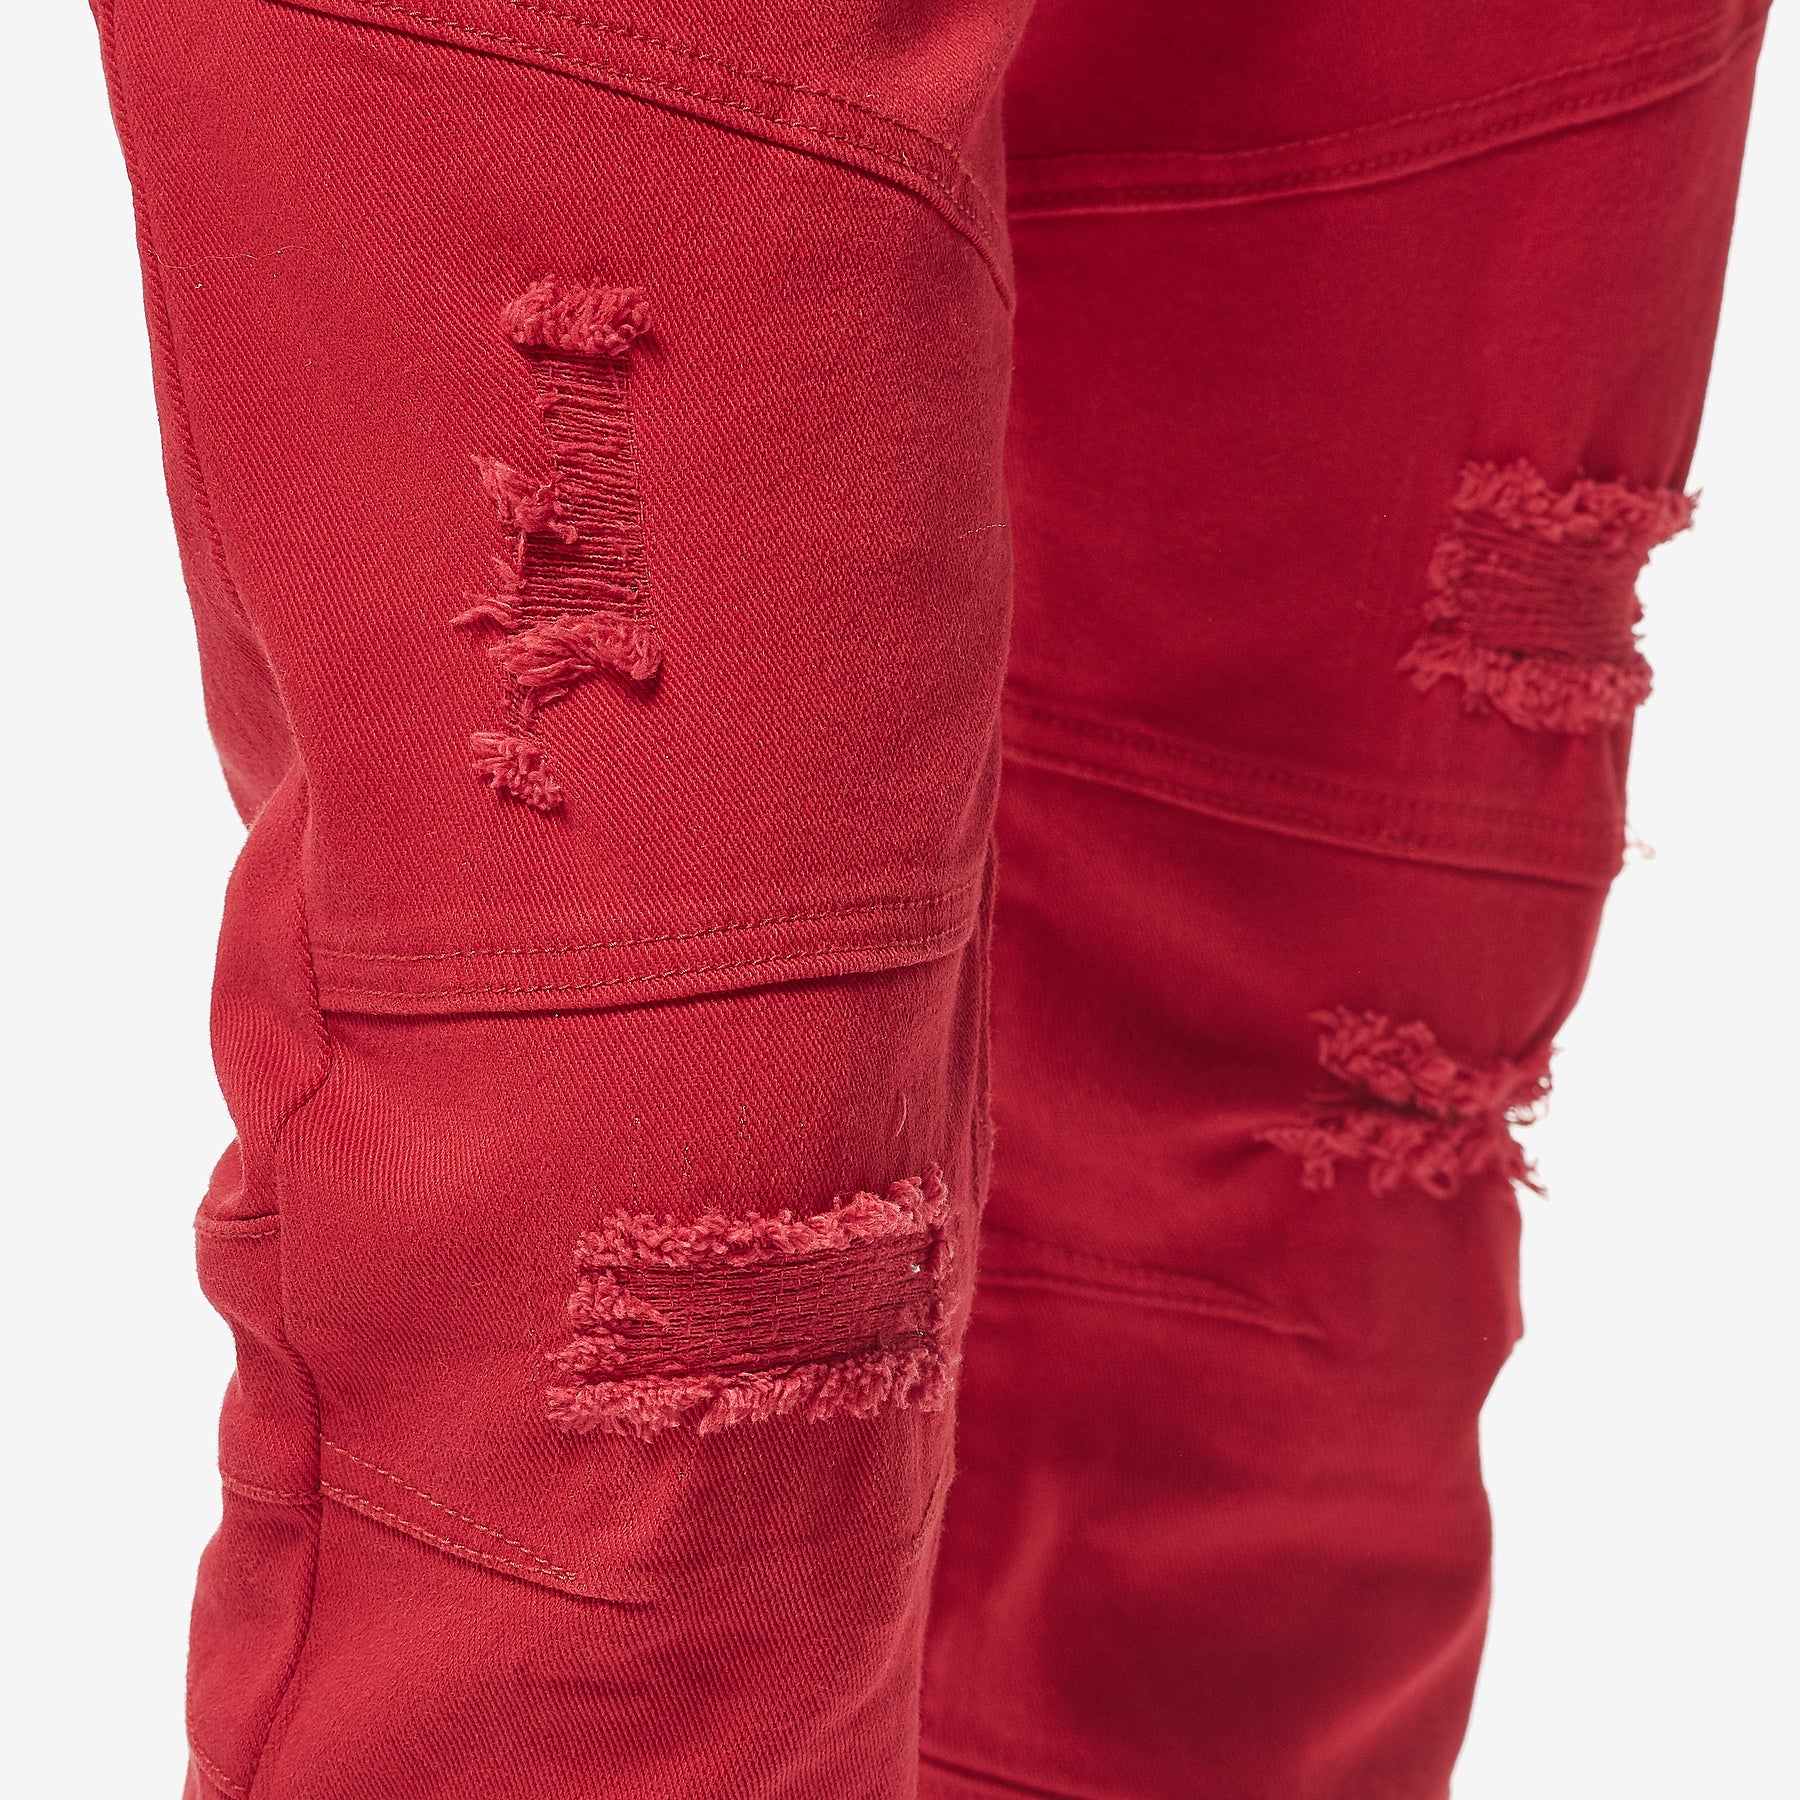 RED PANTS WITH SIDE POCKETS - Copper Rivet